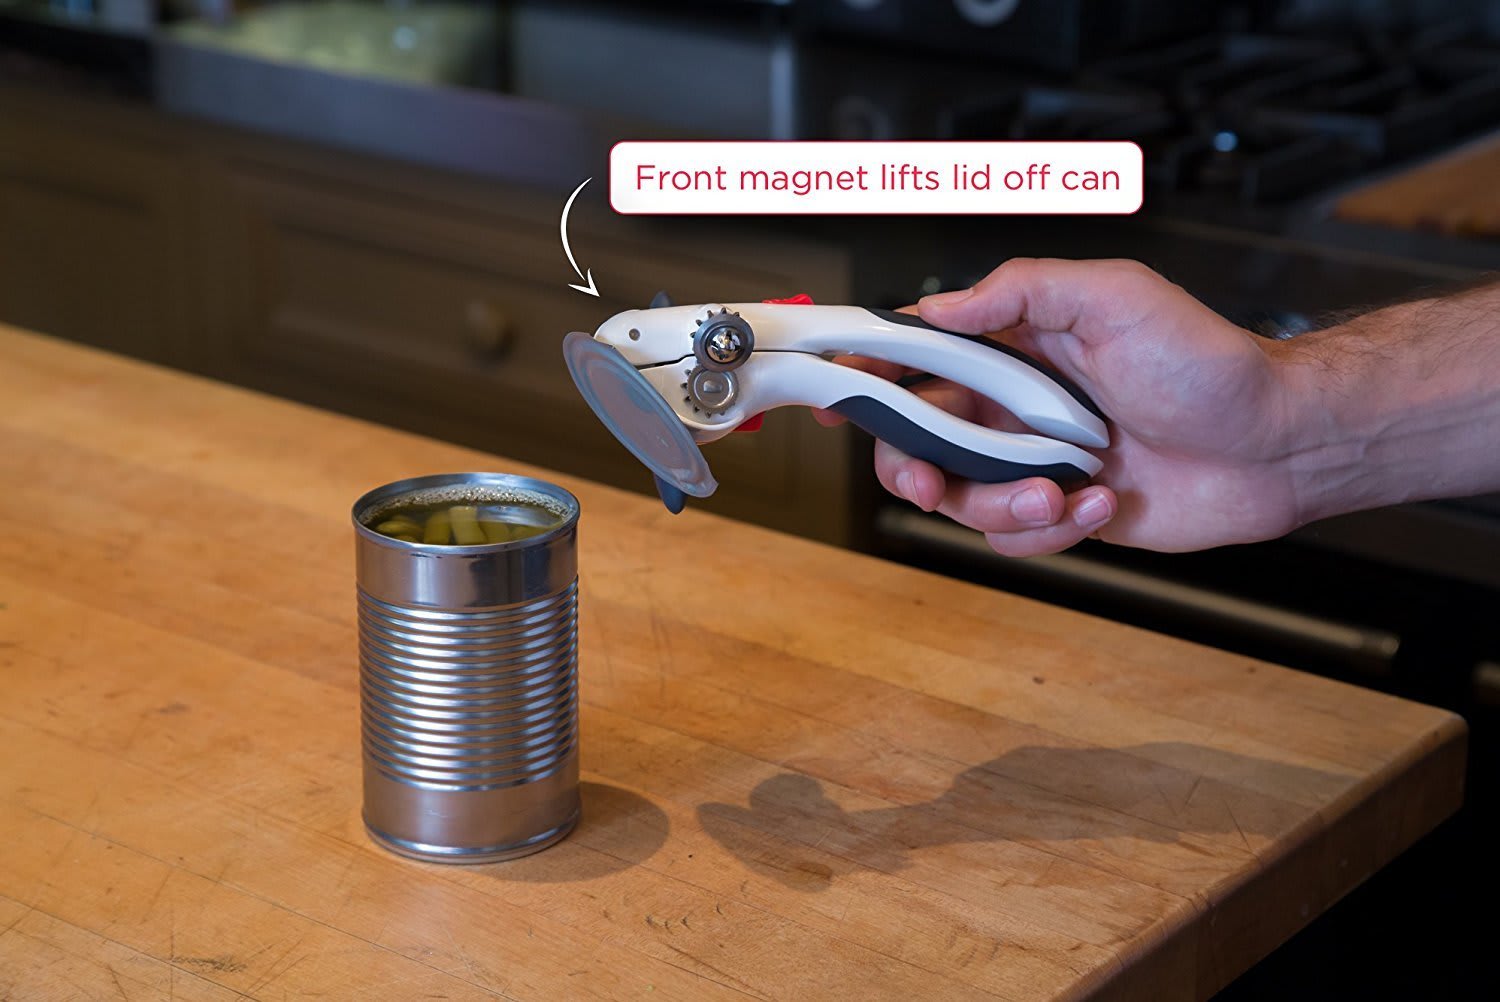 OHSAY USA World's Best Can Opener – Xtra American